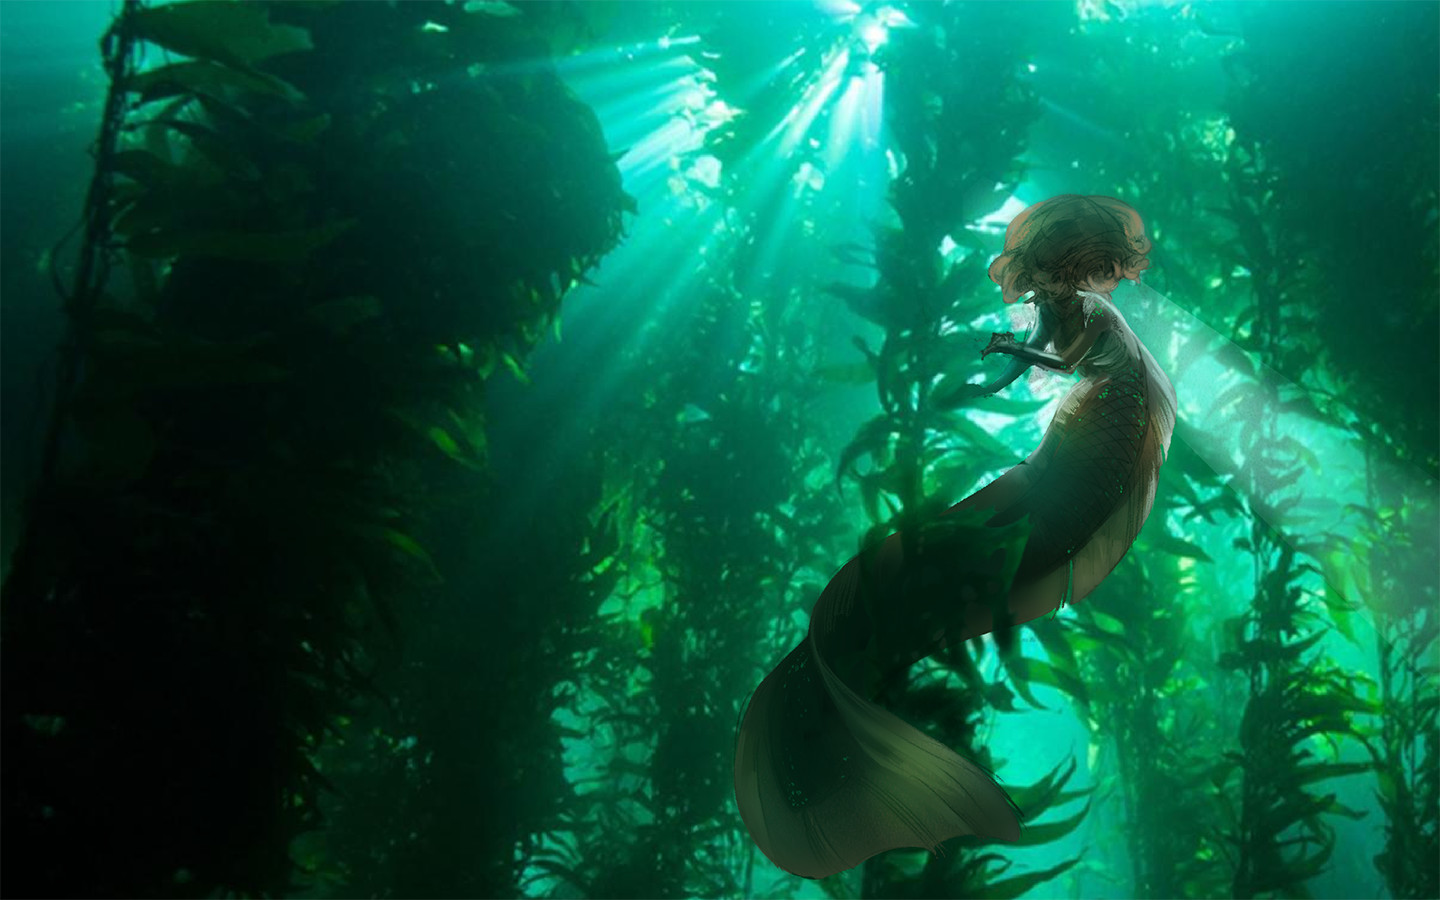 original photo from http://oceana.org/marine-life/marine-science-and-ecosystems/kelp-forest